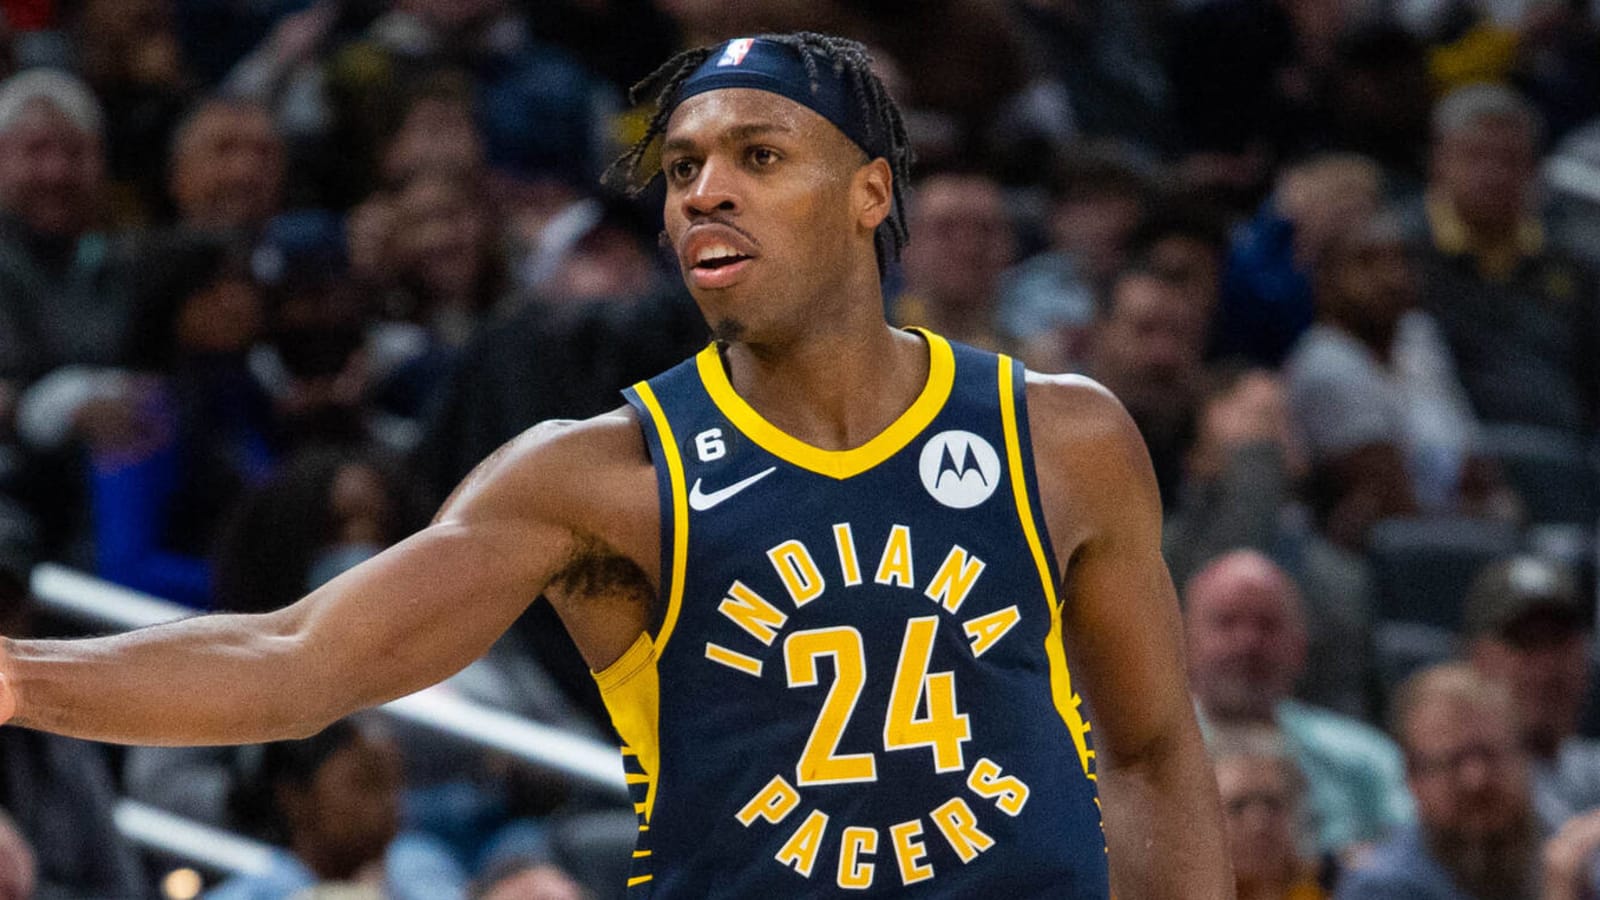 Myles Turner, Buddy Hield don't move the needle enough for Lakers?